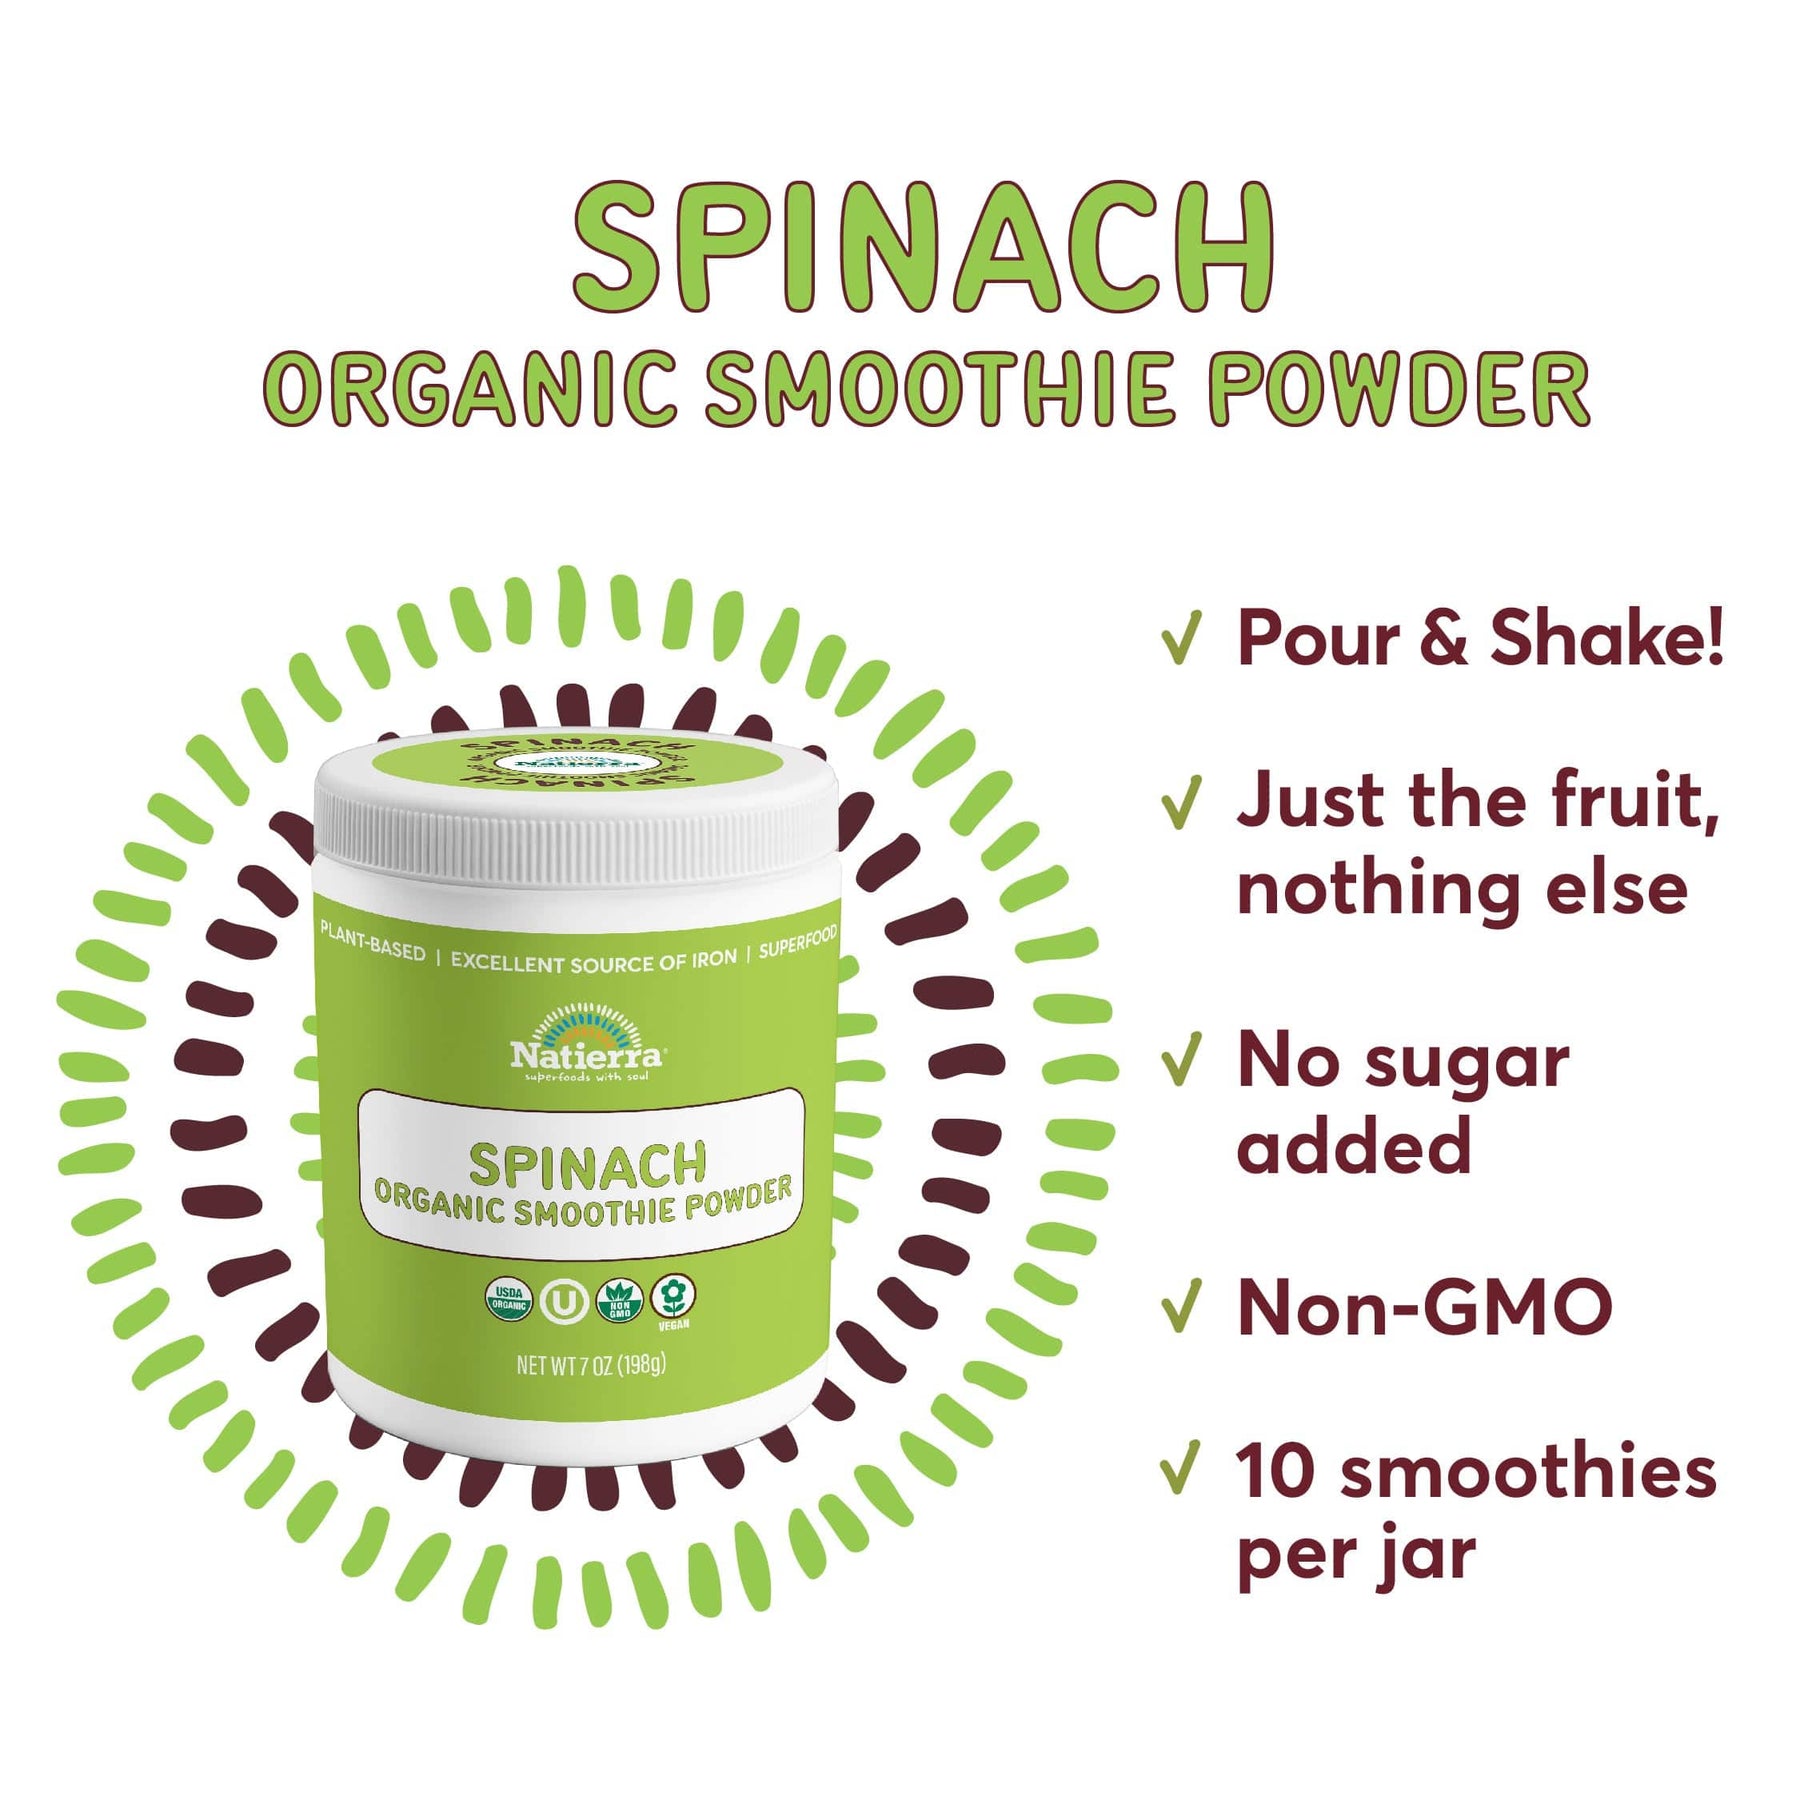 A jar of Natierra Spinach Organic Smoothie Powder next to list of main product claims